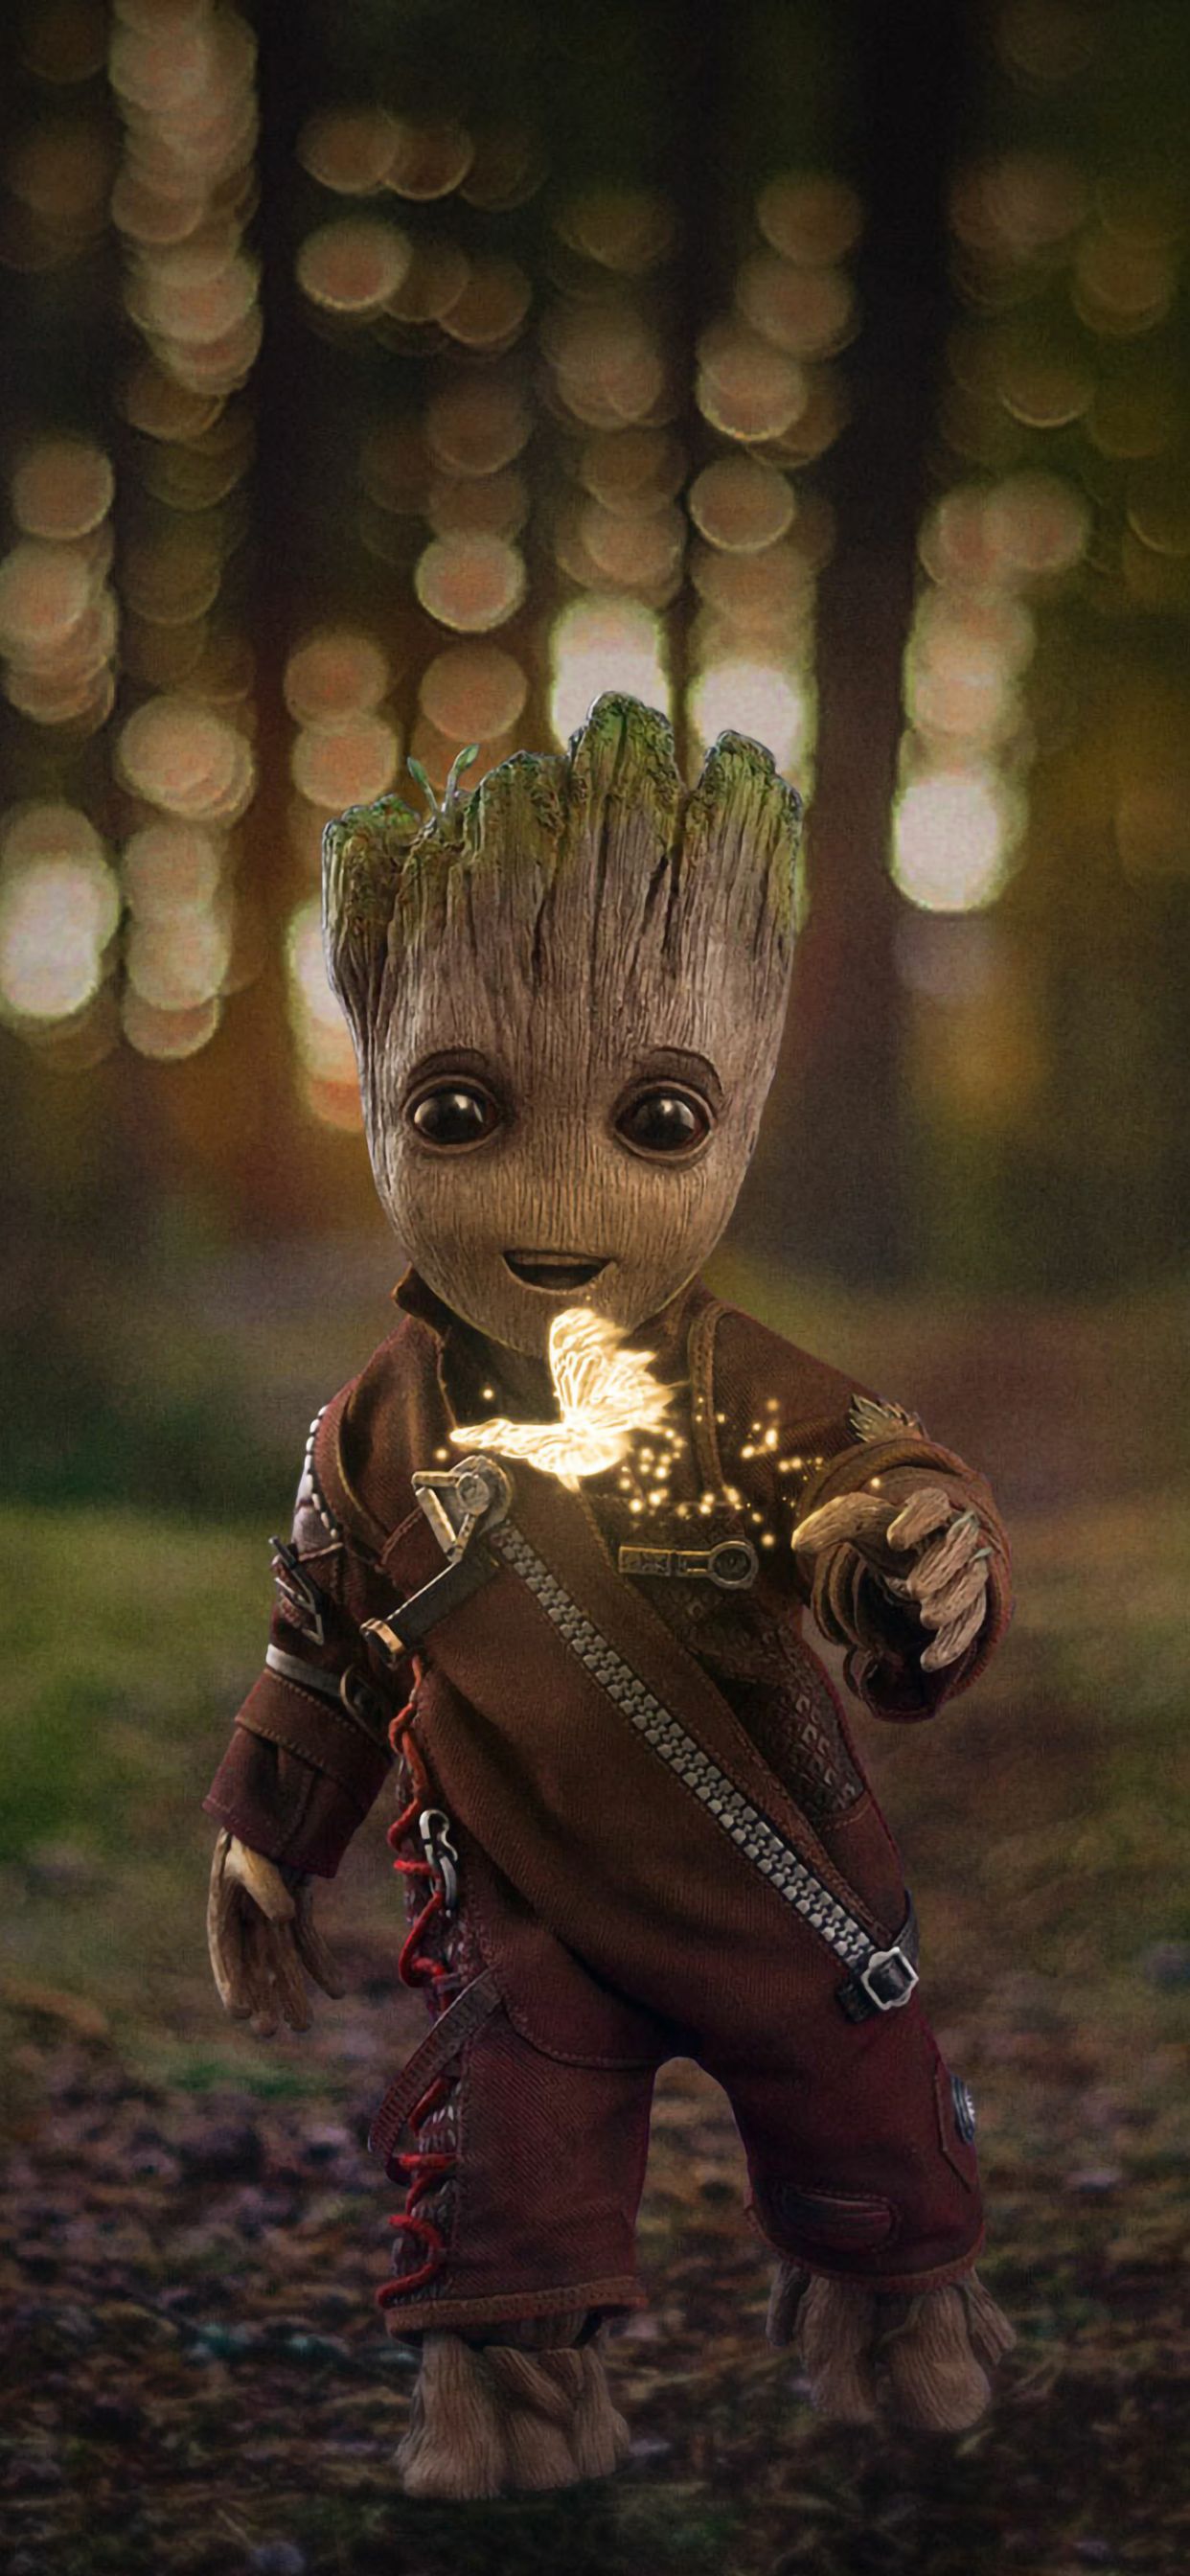 Baby Groot 2019 iPhone XS MAX Wallpaper, HD Superheroes 4K Wallpaper, Image, Photo and Background